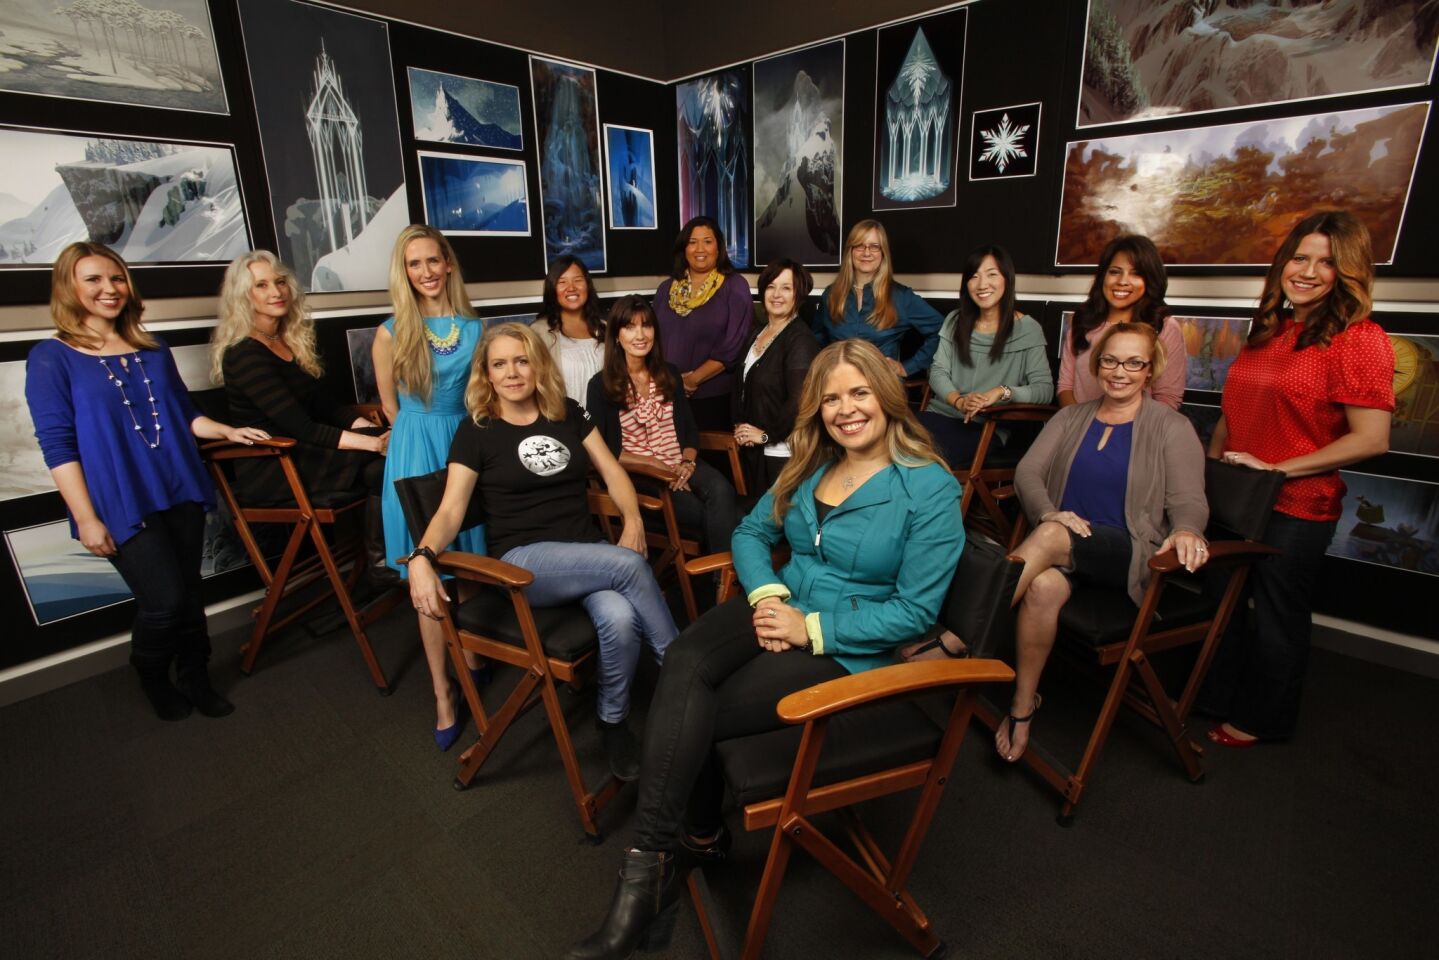 These are the women of Disney's animation studios. Jennifer Lee, front right, one of the directors of Disney Animation's "Frozen" and Lauren MacMullan, front left, director of "Get a Horse," a short film coming out soon, are surrounded by other women who work on animation projects at the Walt Disney Studios.